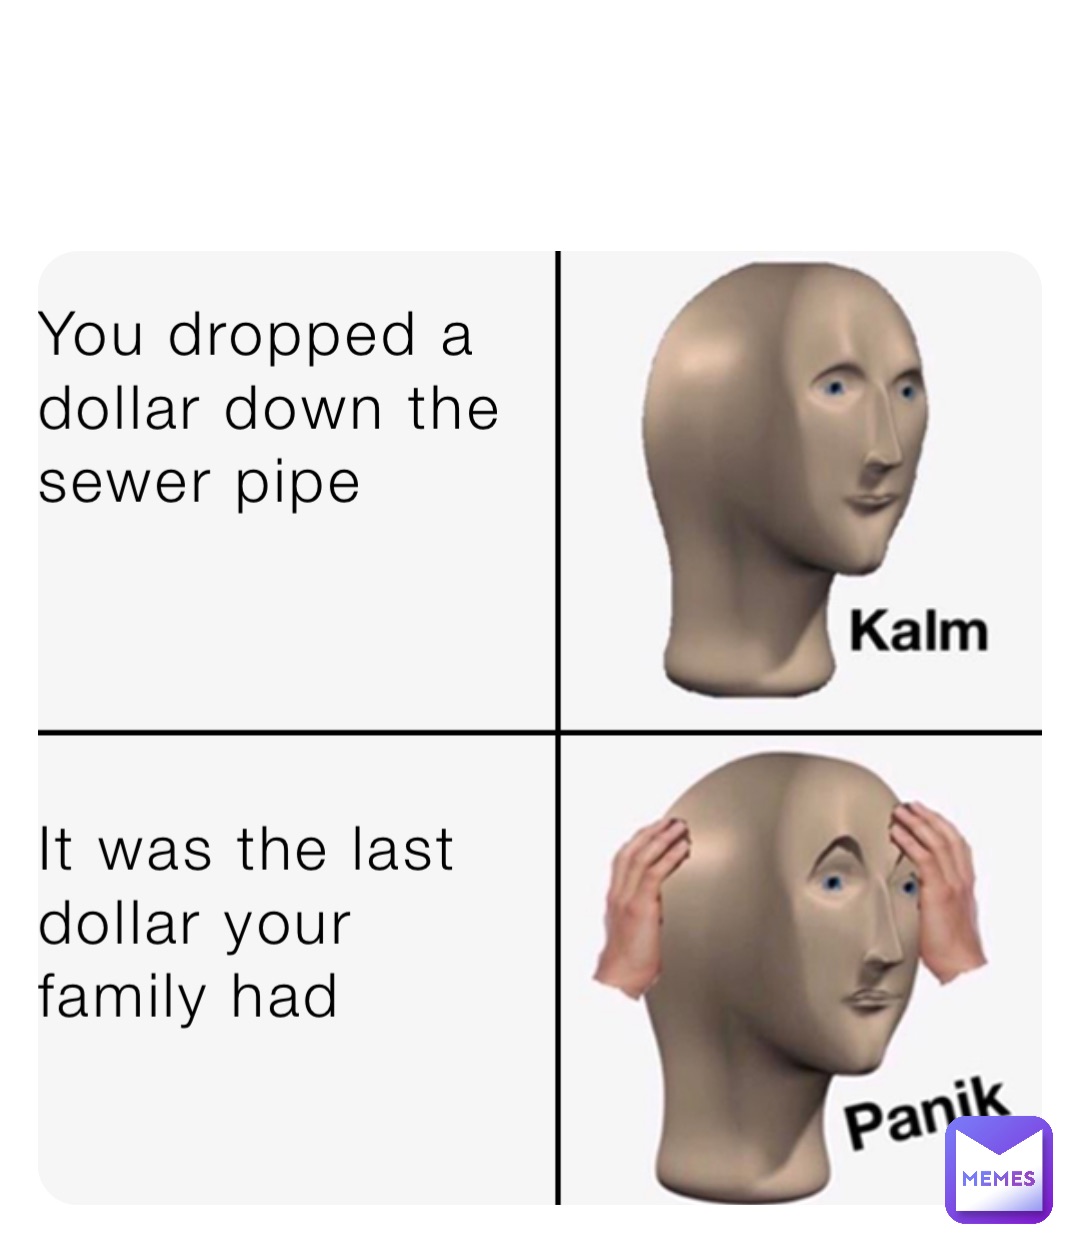 You dropped a
dollar down the
sewer pipe It was the last
dollar your 
family had